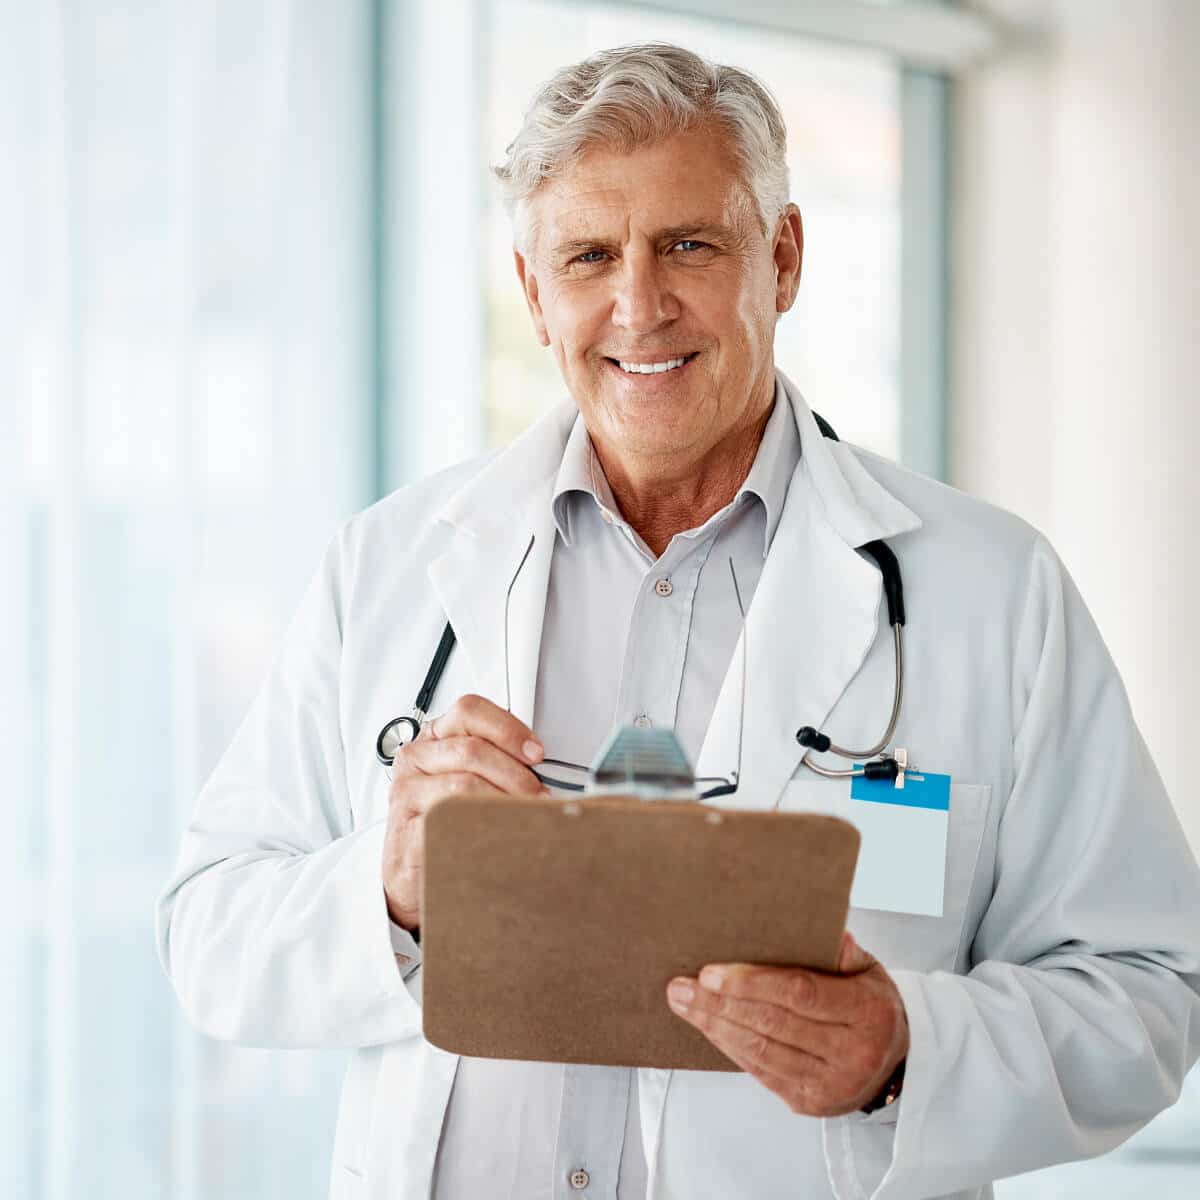 An image of a doctor holding a clipboard